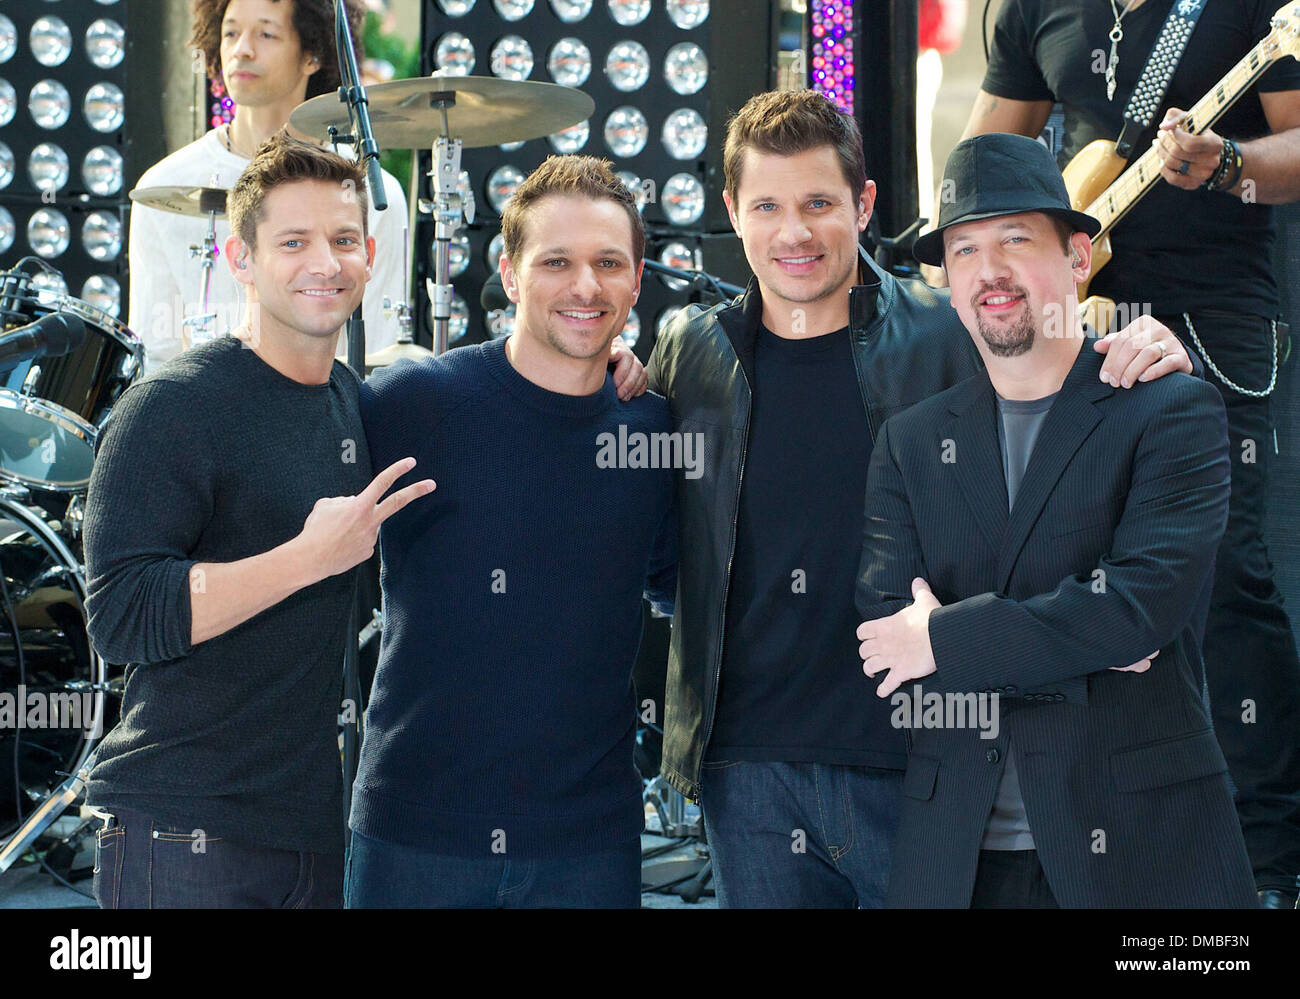 Jeff Timmons Drew Lachey Nick Lachey and Justin Jeffre 98 Degrees re-unite  to perform live at Rockefeller Plaza as part of Stock Photo - Alamy